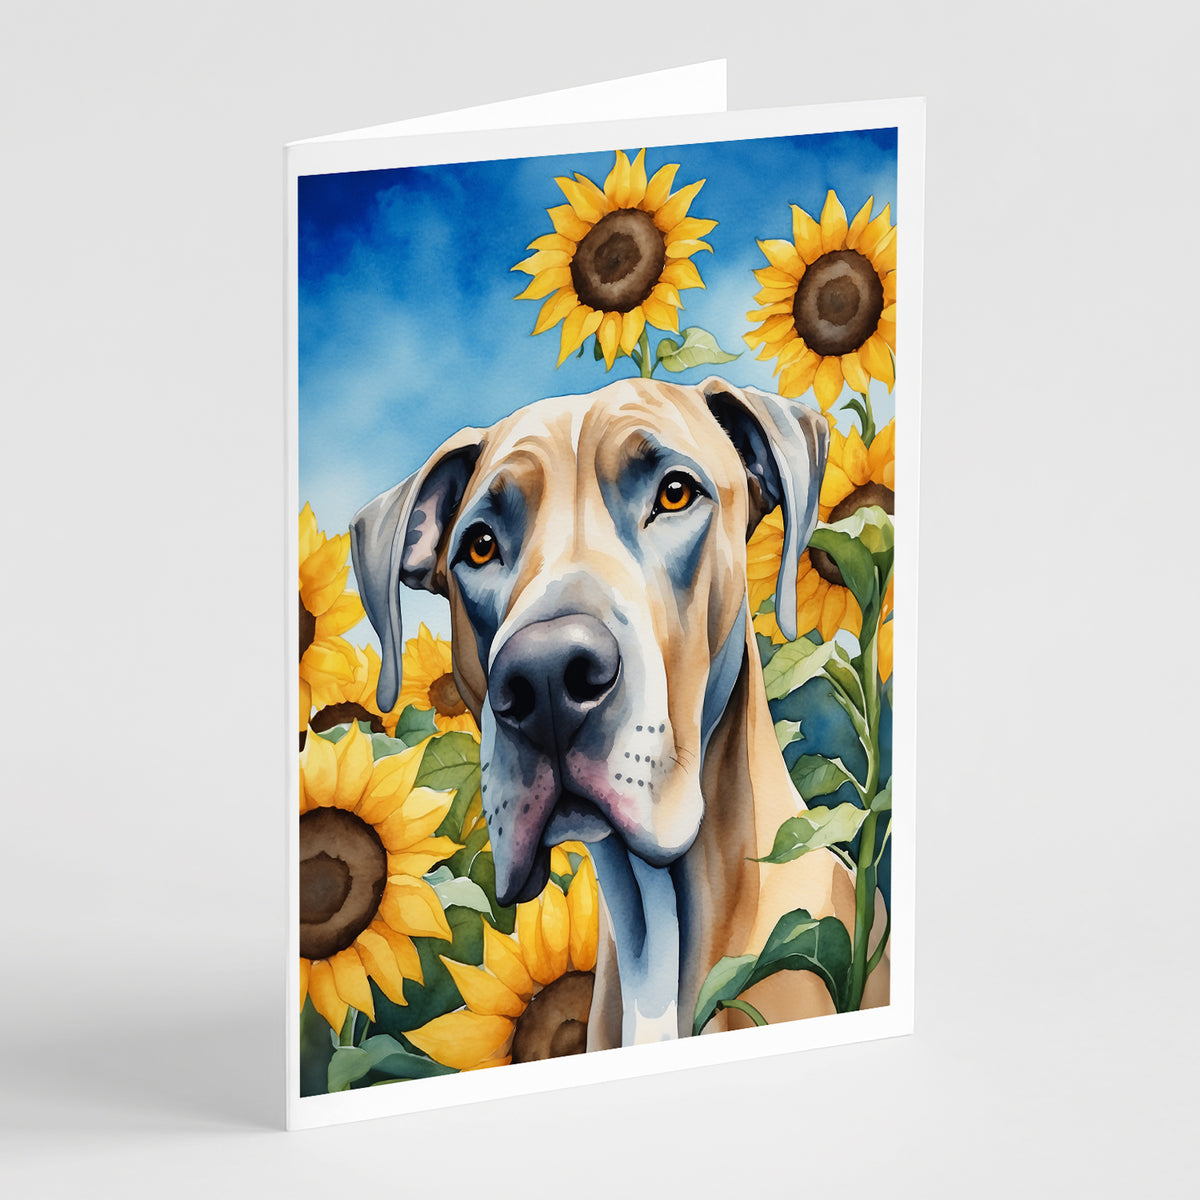 Buy this Great Dane in Sunflowers Greeting Cards Pack of 8